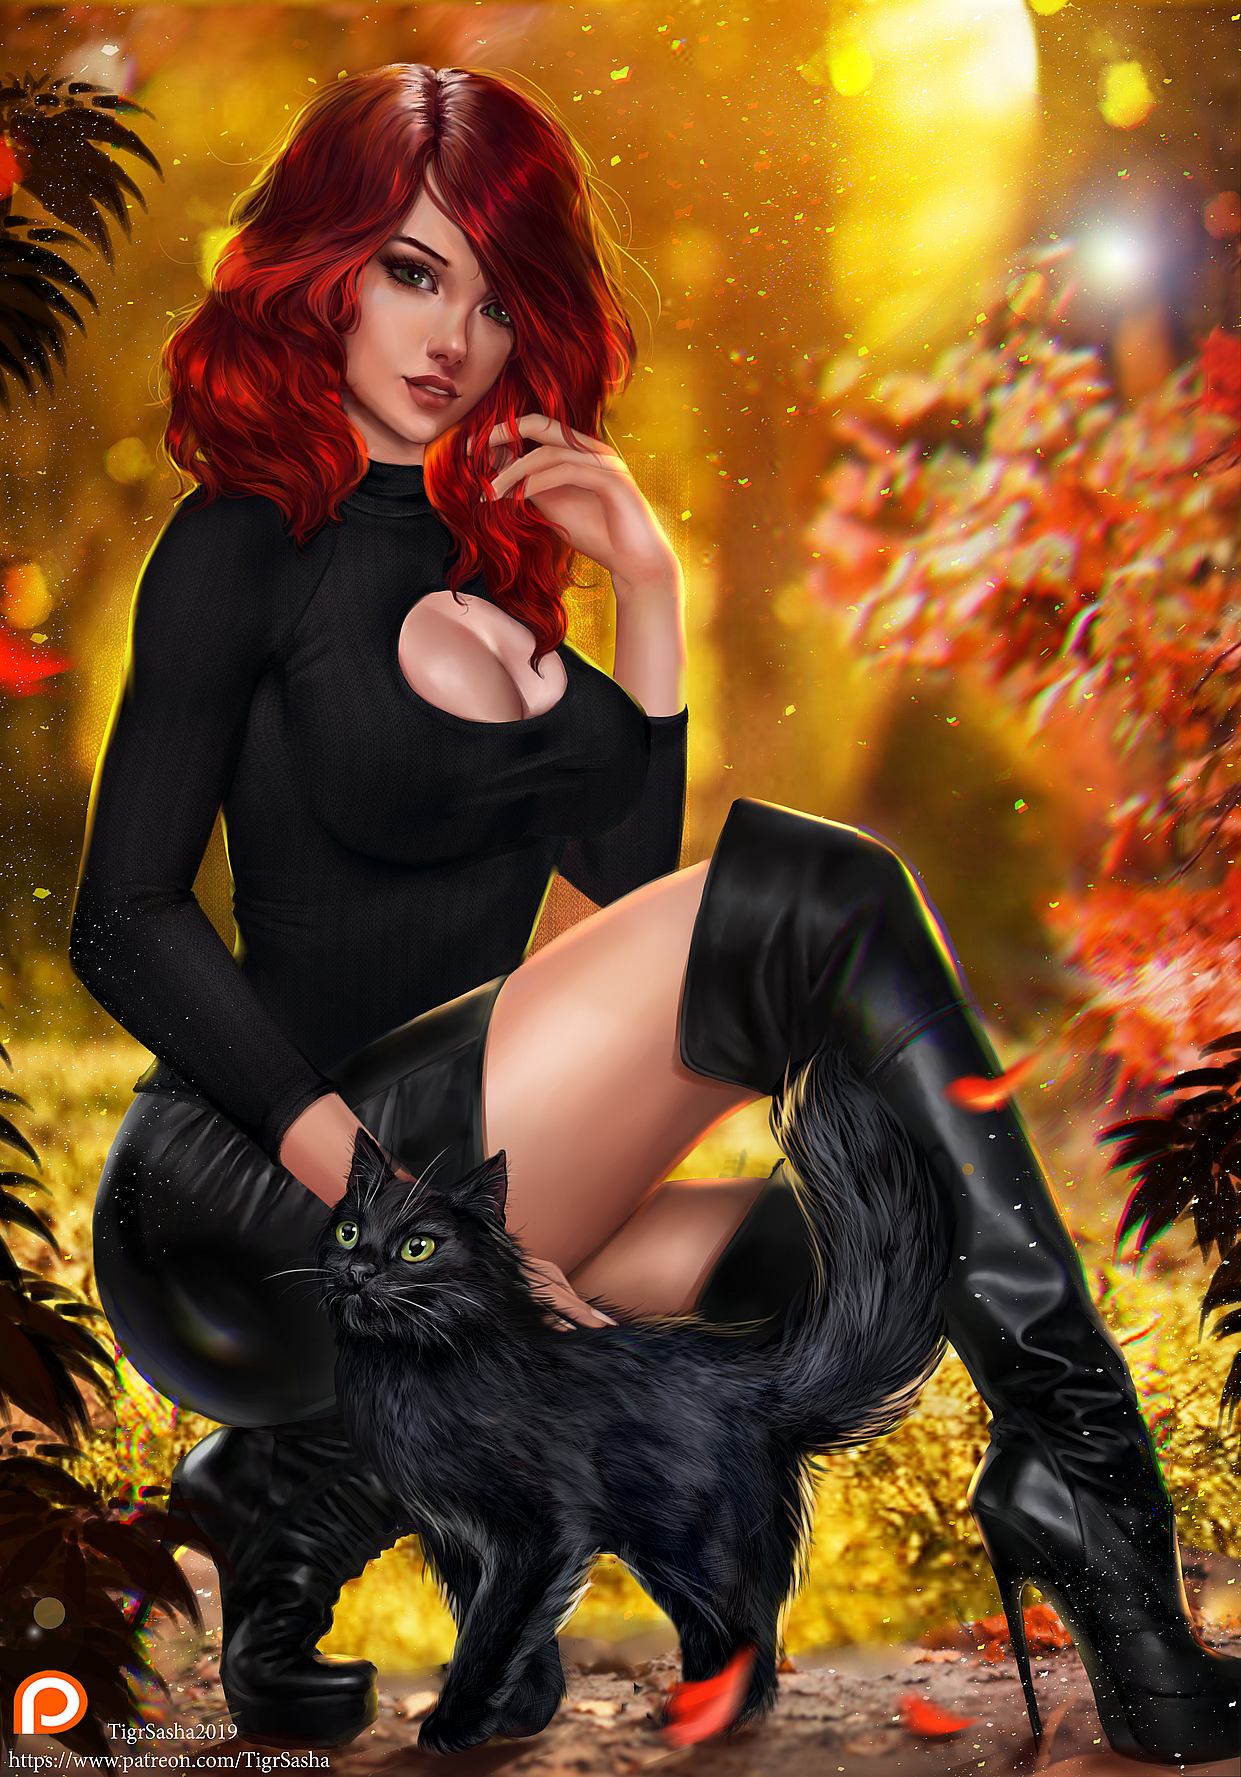 Red-haired girl with black cat: OC anime drawing: Original anime characters (Artist: Tigrsasha)